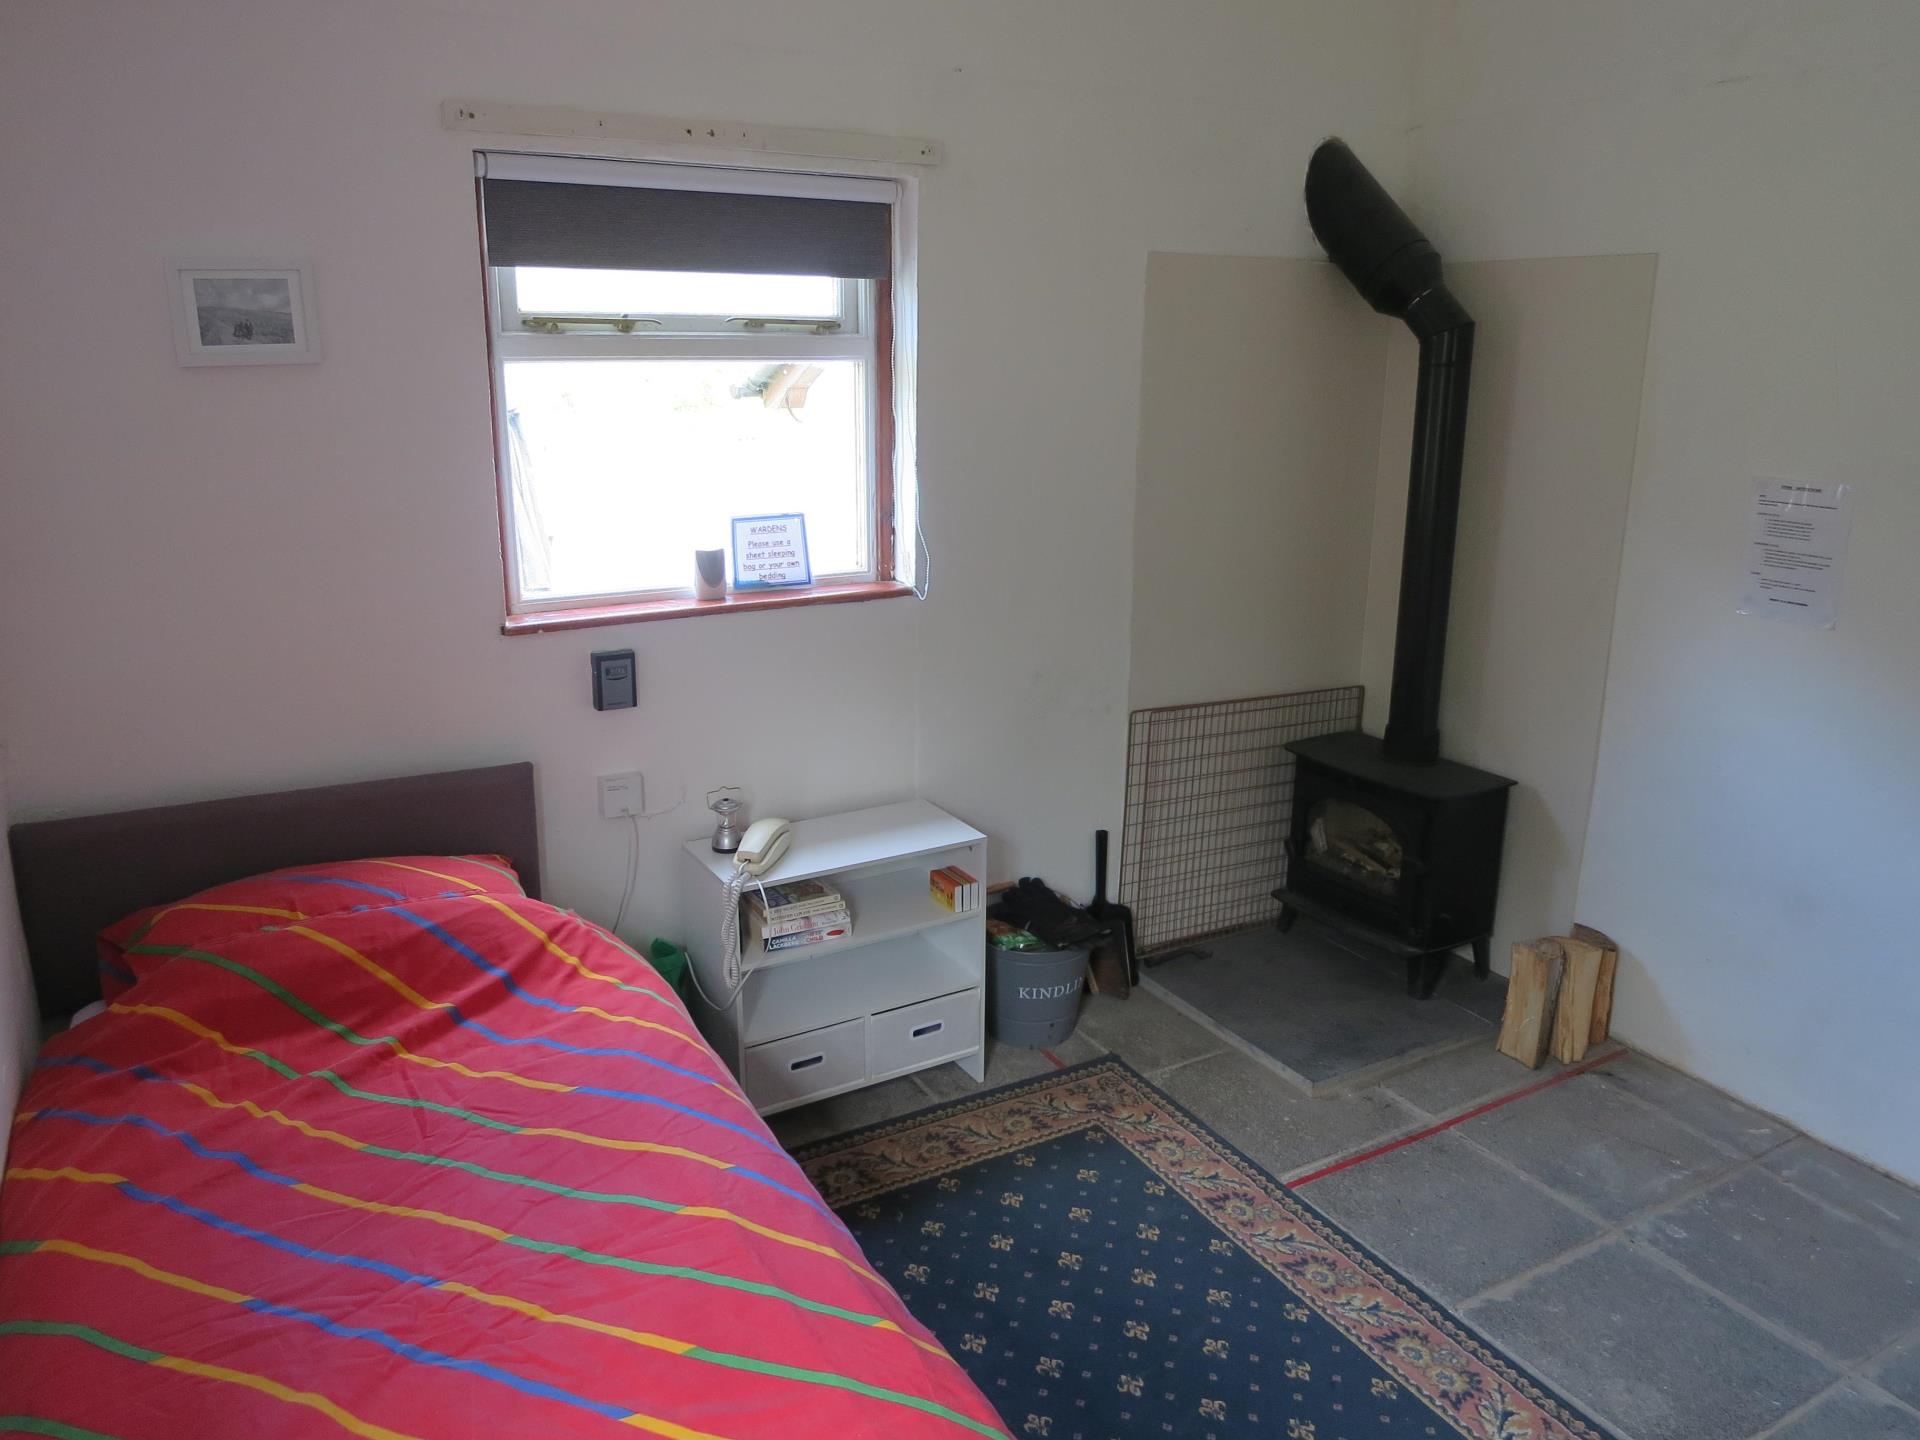 Lessabled accommodation at Dolgoch